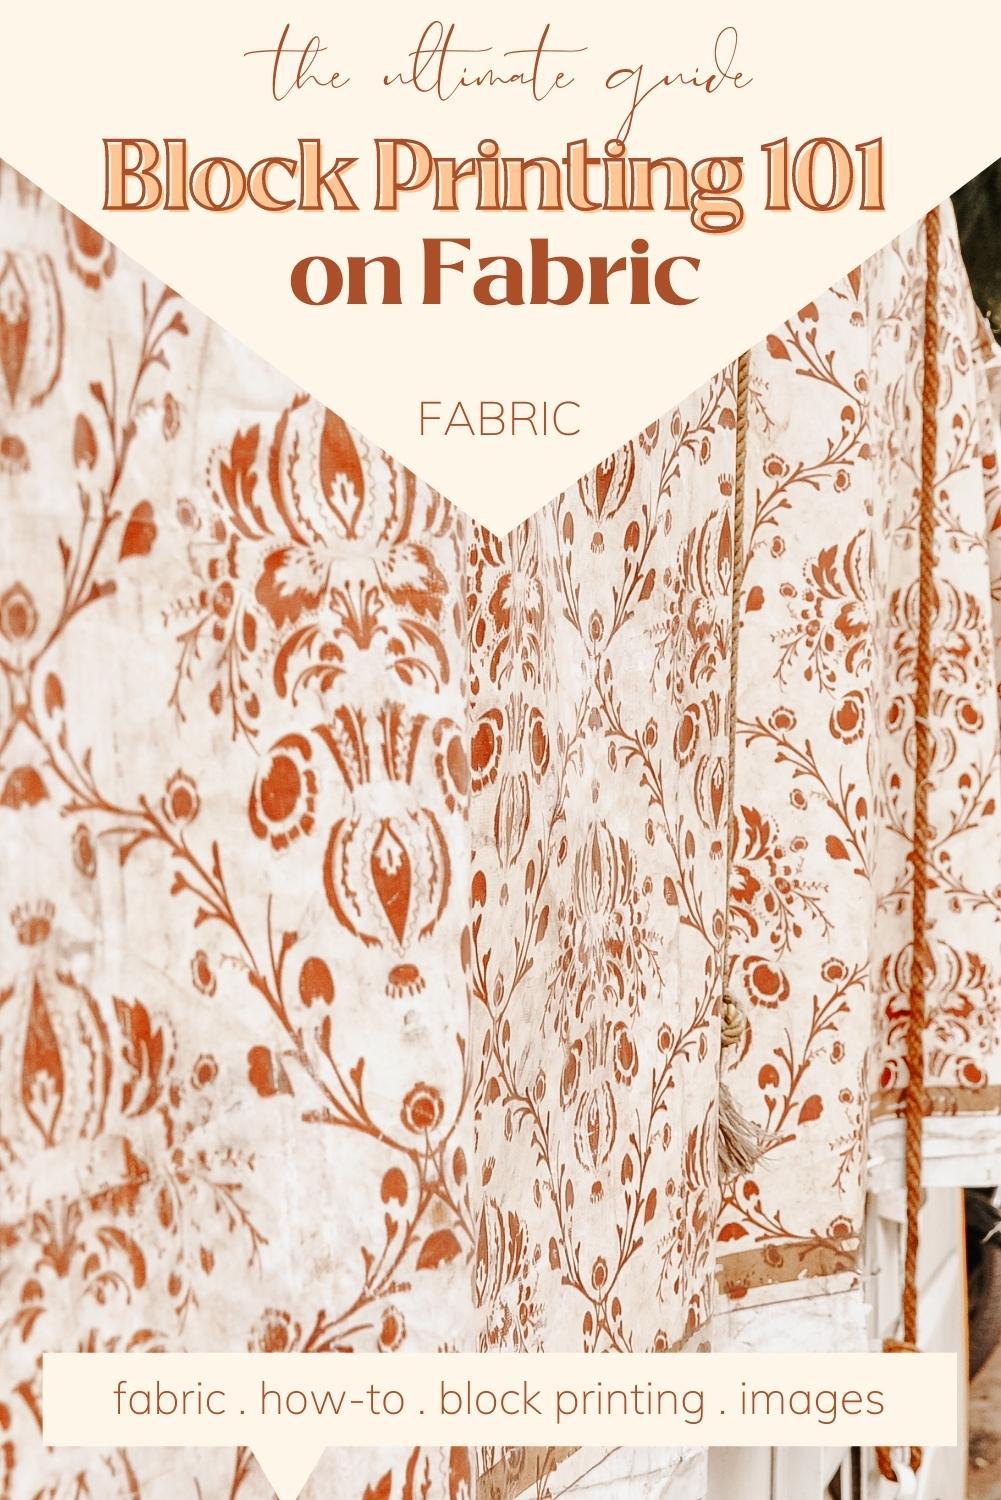 Block Printing On Fabric 101 (The Ultimate Guide)